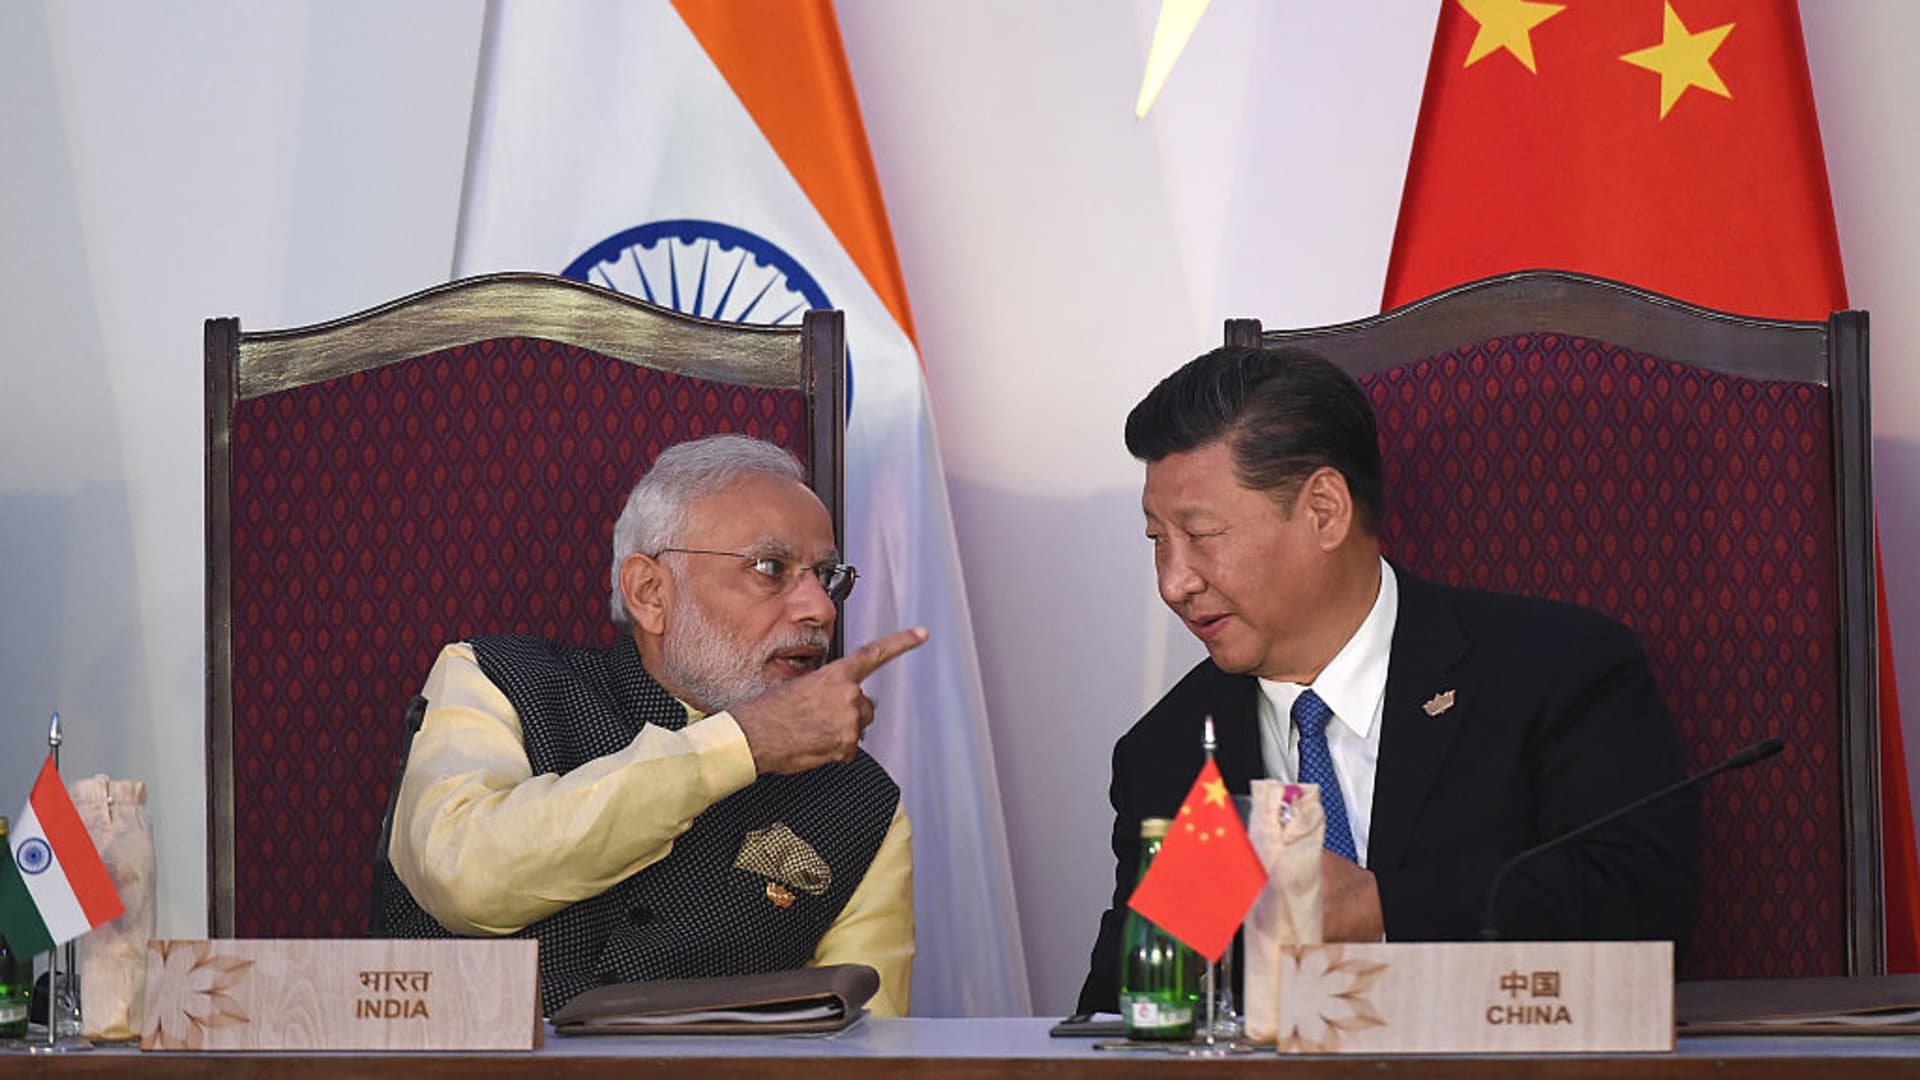 How India is grand China as Asia’s tech powerhouse